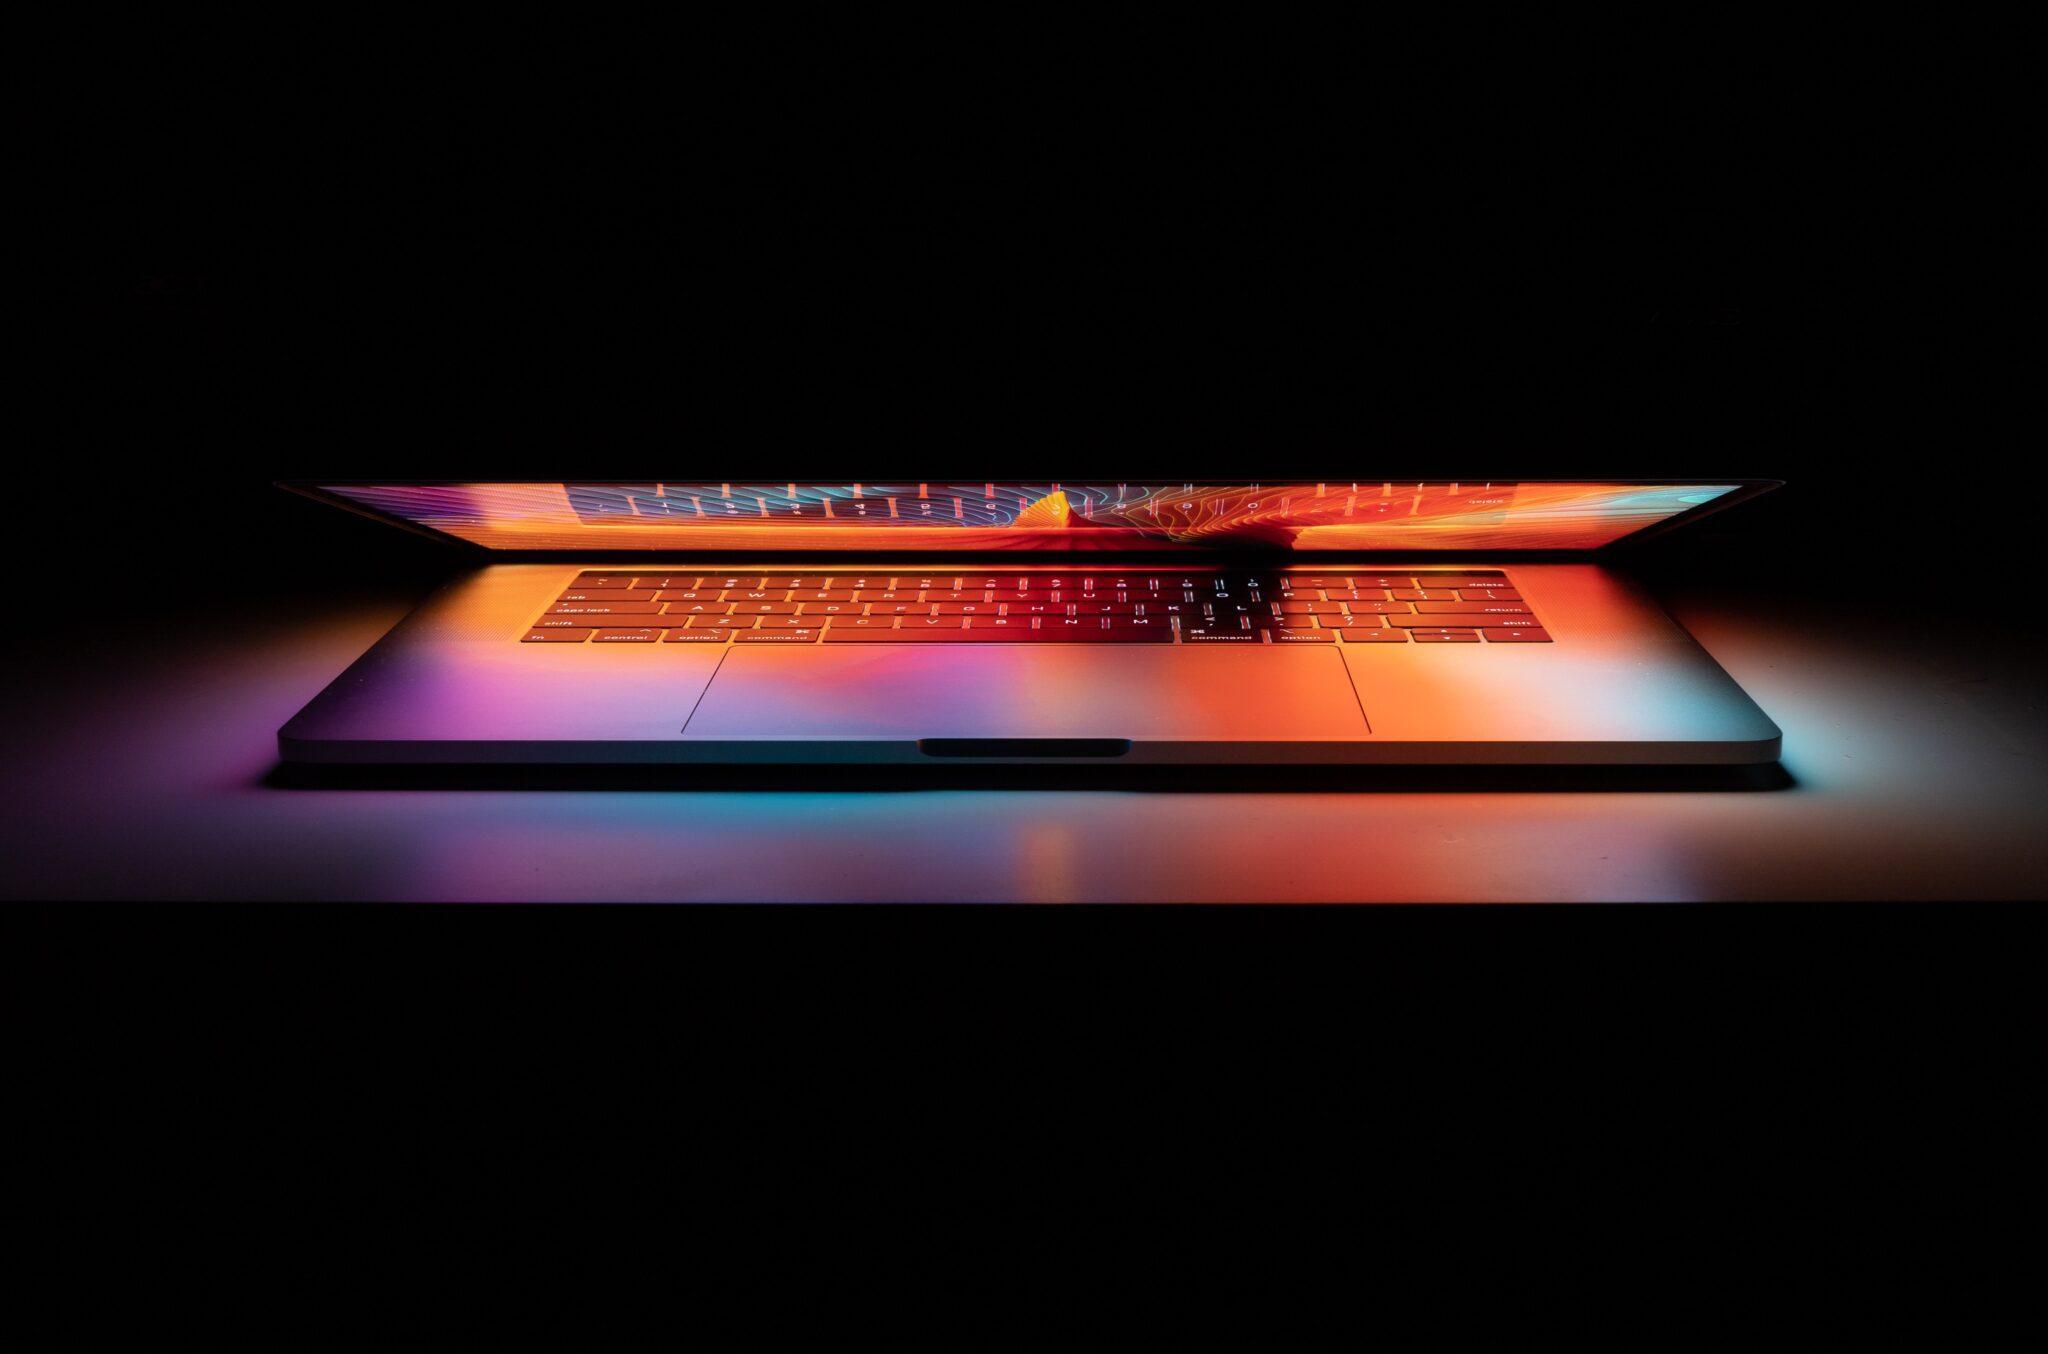 lit up laptop partially closed in dark room